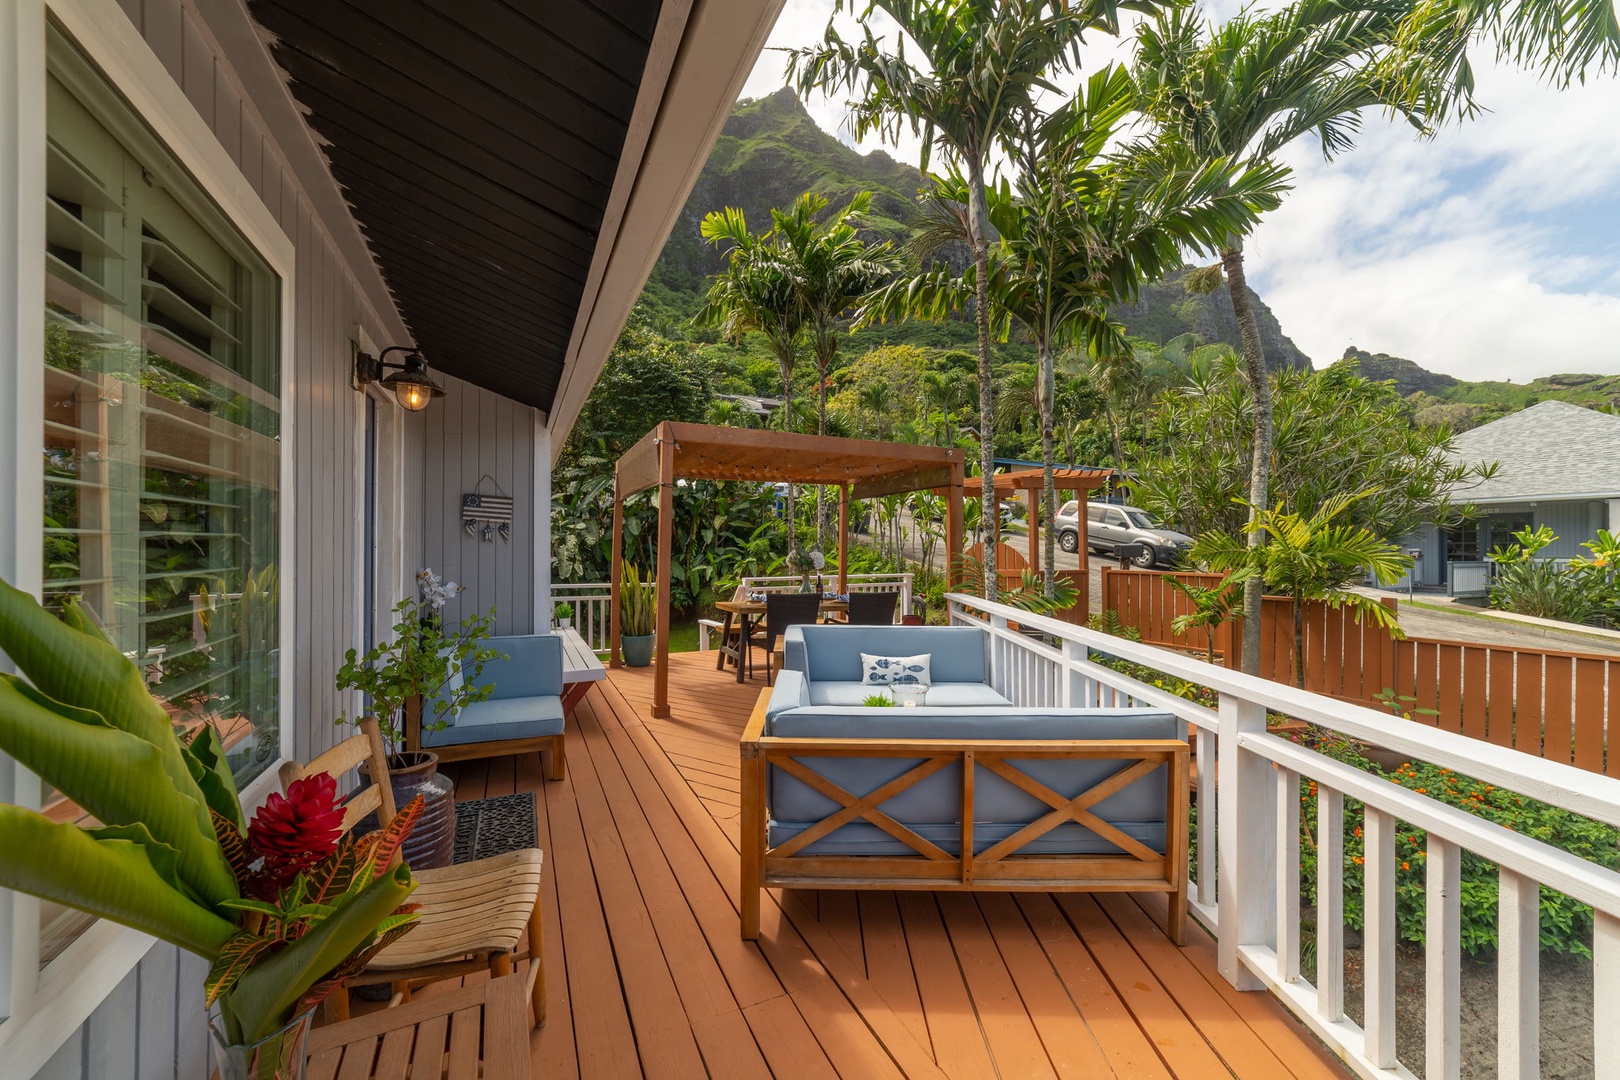 Kaaawa Vacation Rentals, Pali Kai - Outdoor Lanai with Mountain View in the background